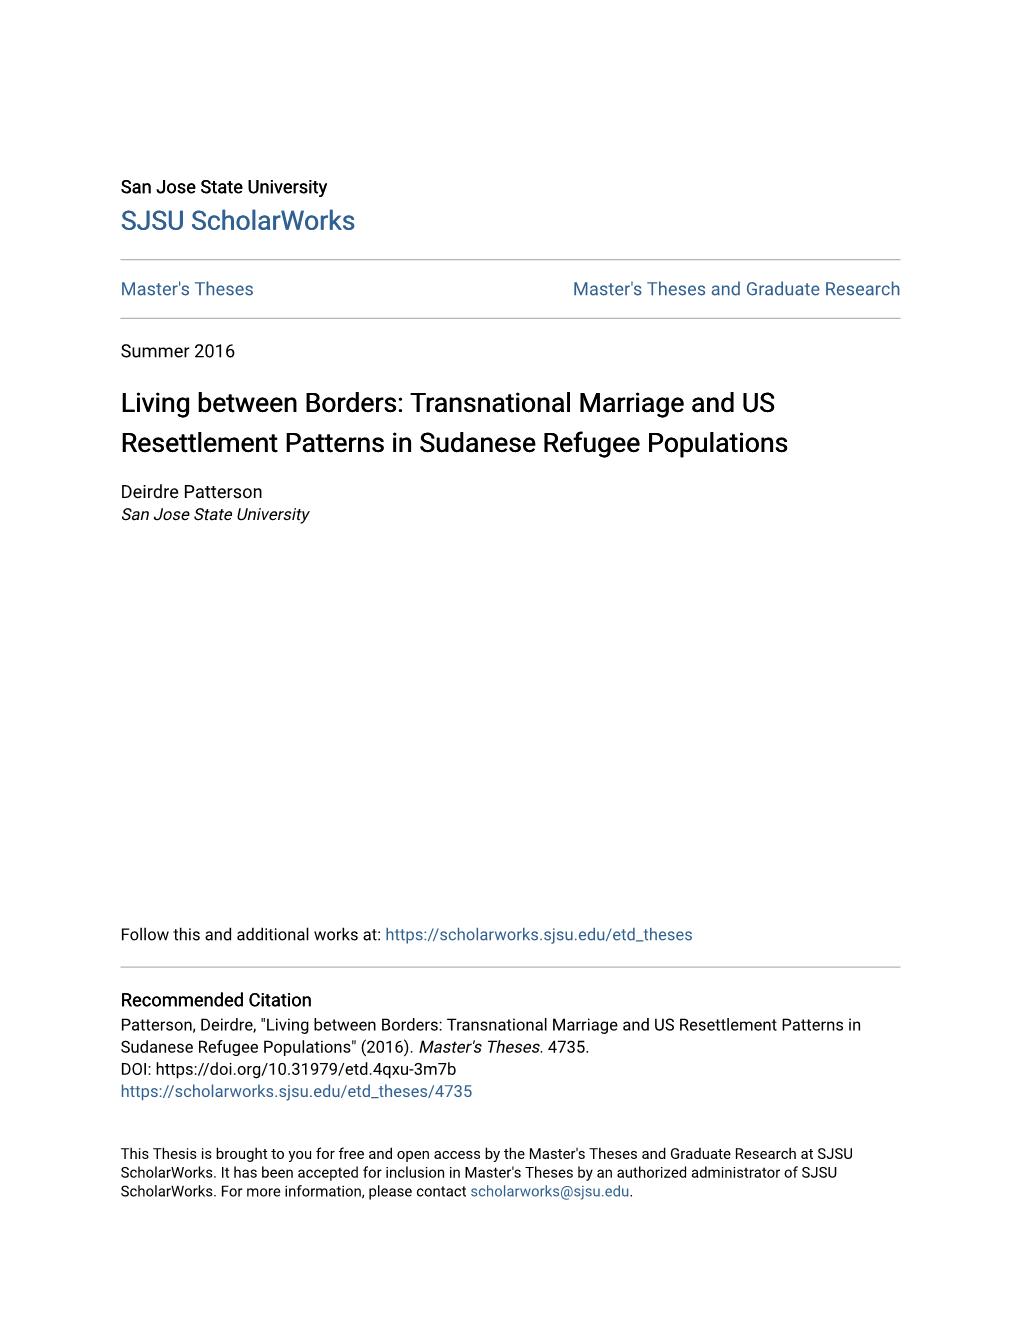 Transnational Marriage and US Resettlement Patterns in Sudanese Refugee Populations